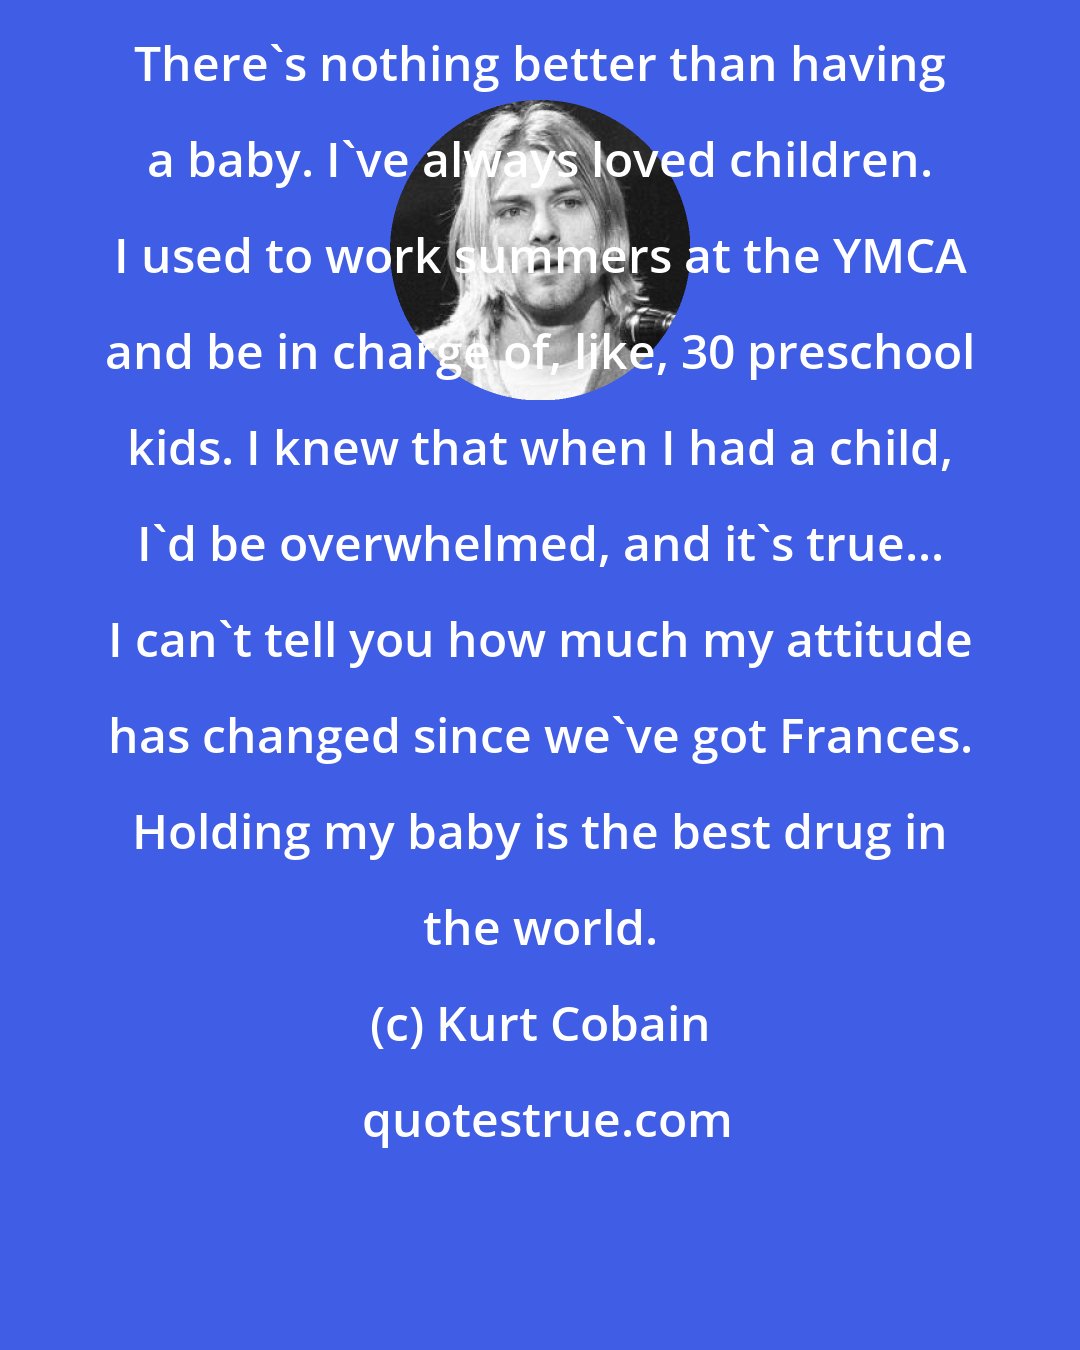 Kurt Cobain: There's nothing better than having a baby. I've always loved children. I used to work summers at the YMCA and be in charge of, like, 30 preschool kids. I knew that when I had a child, I'd be overwhelmed, and it's true... I can't tell you how much my attitude has changed since we've got Frances. Holding my baby is the best drug in the world.